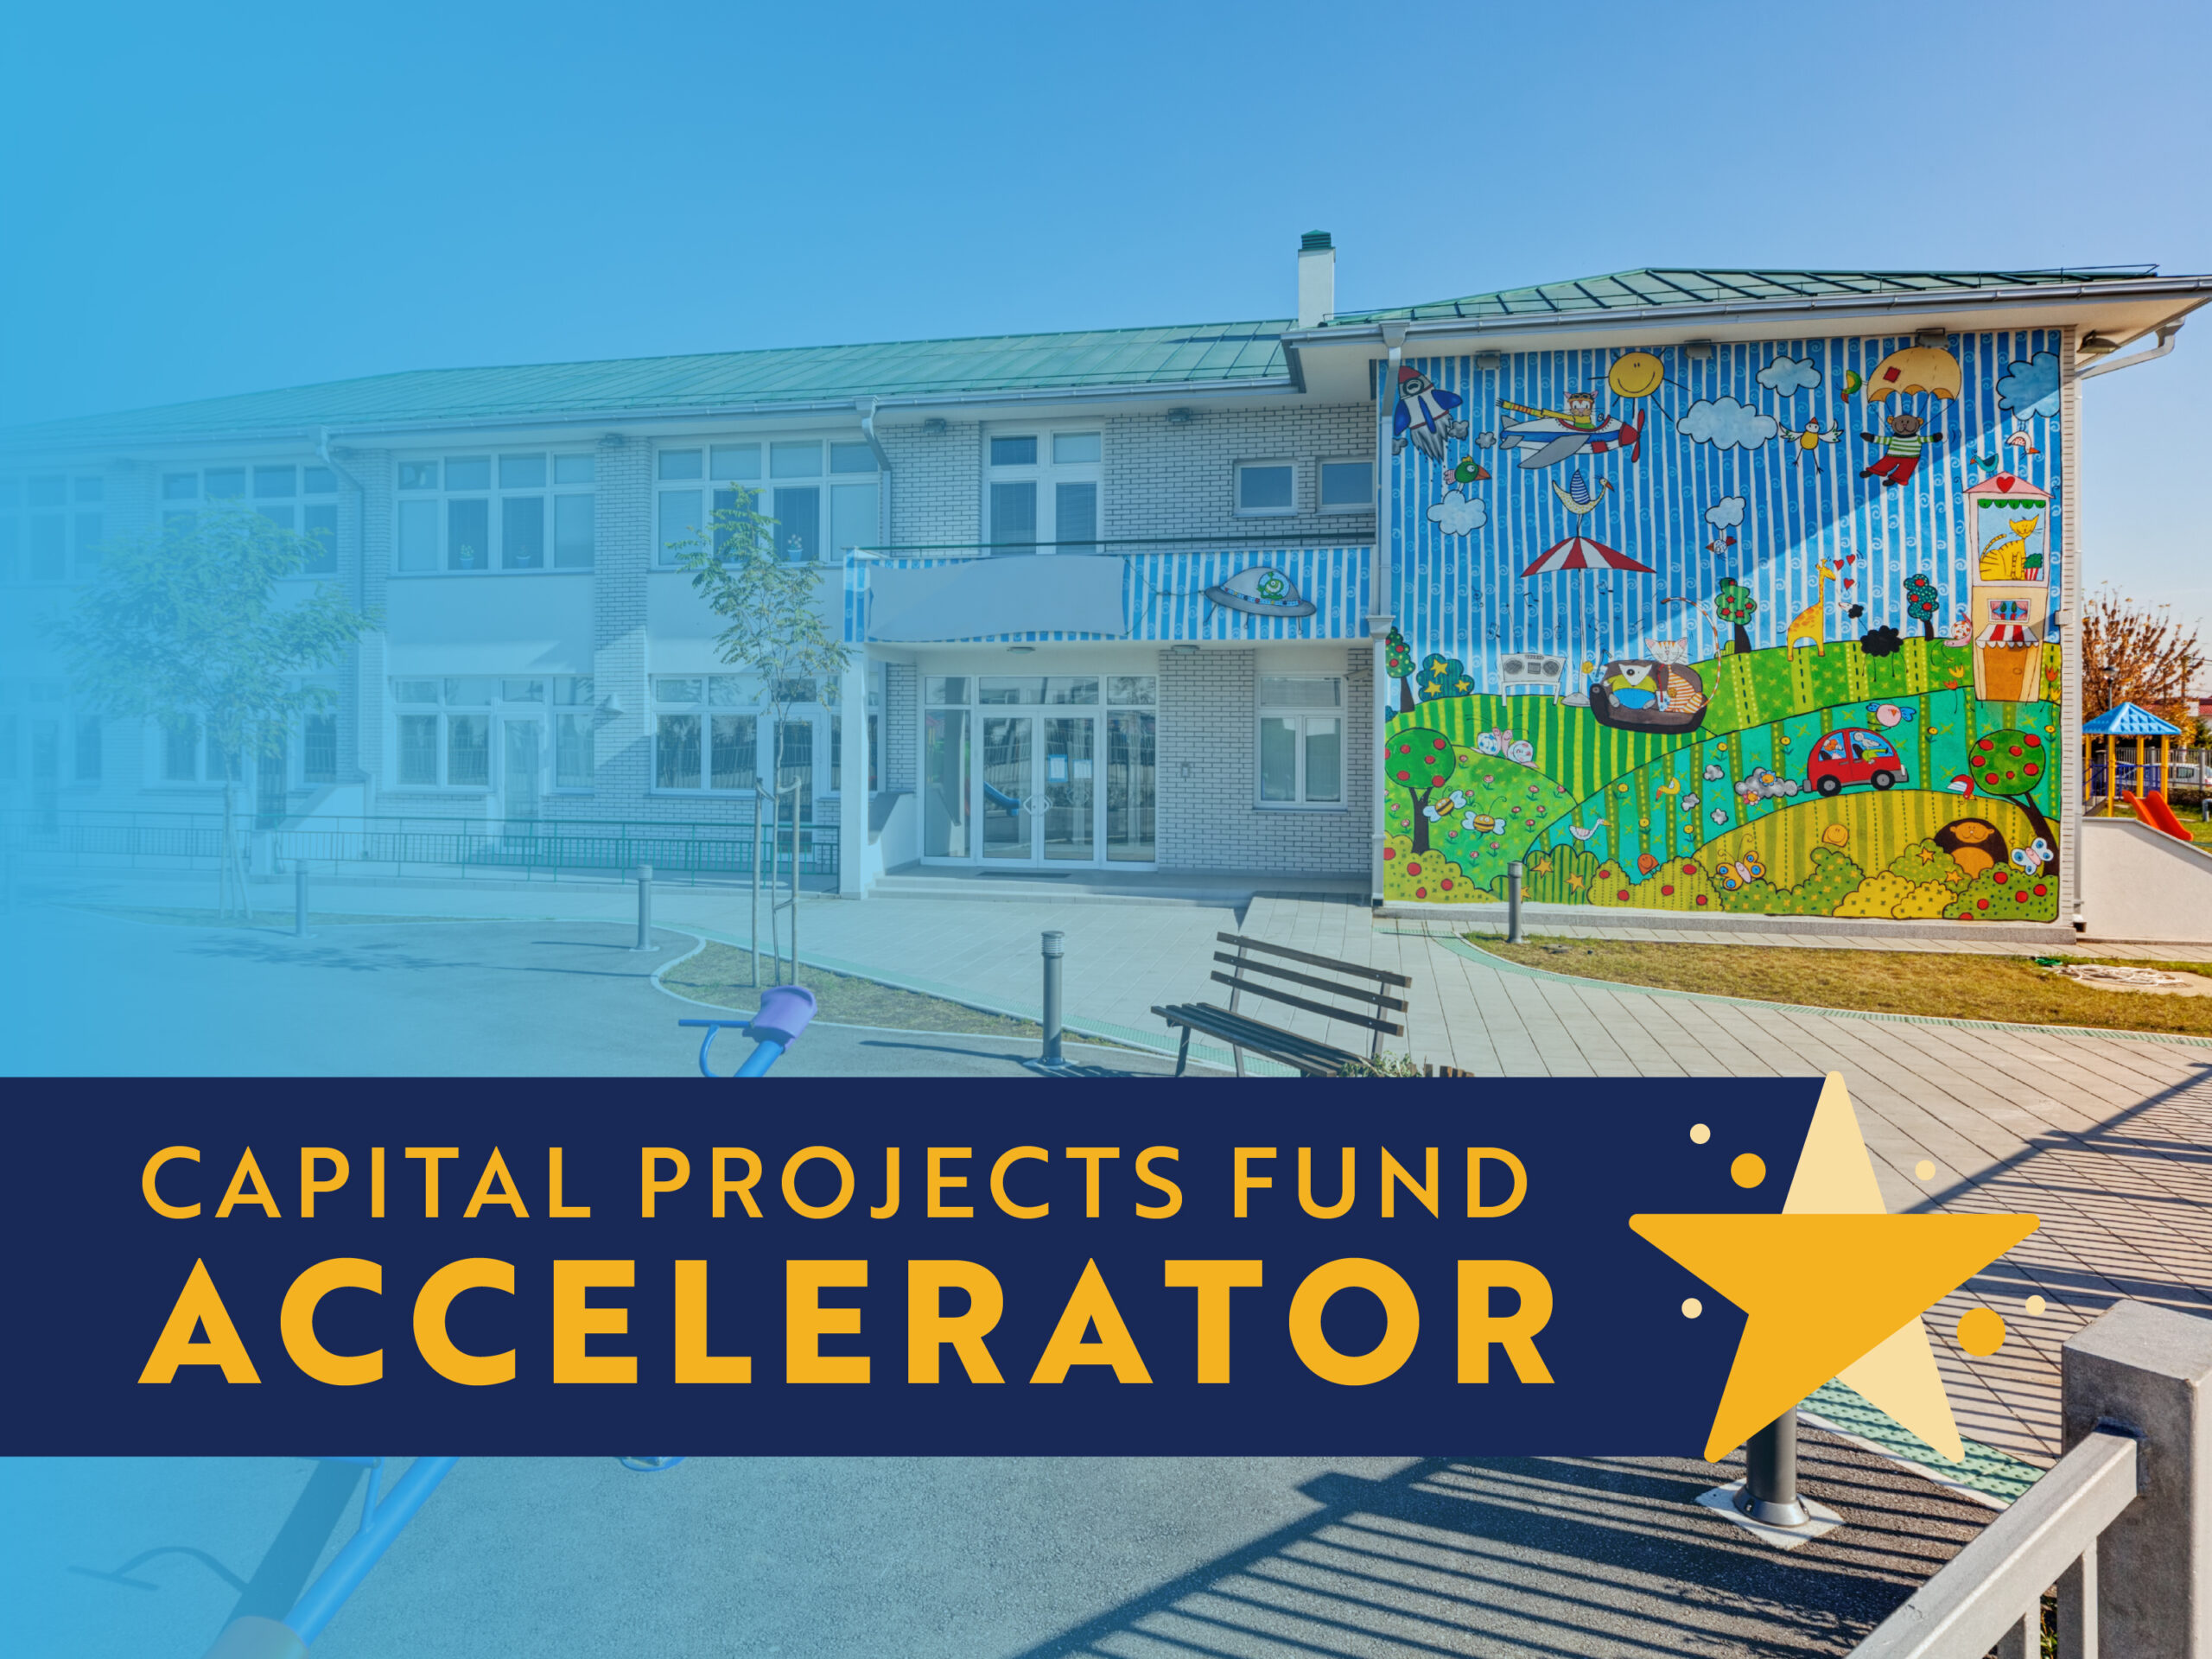 Capital Projects Fund Accelerator